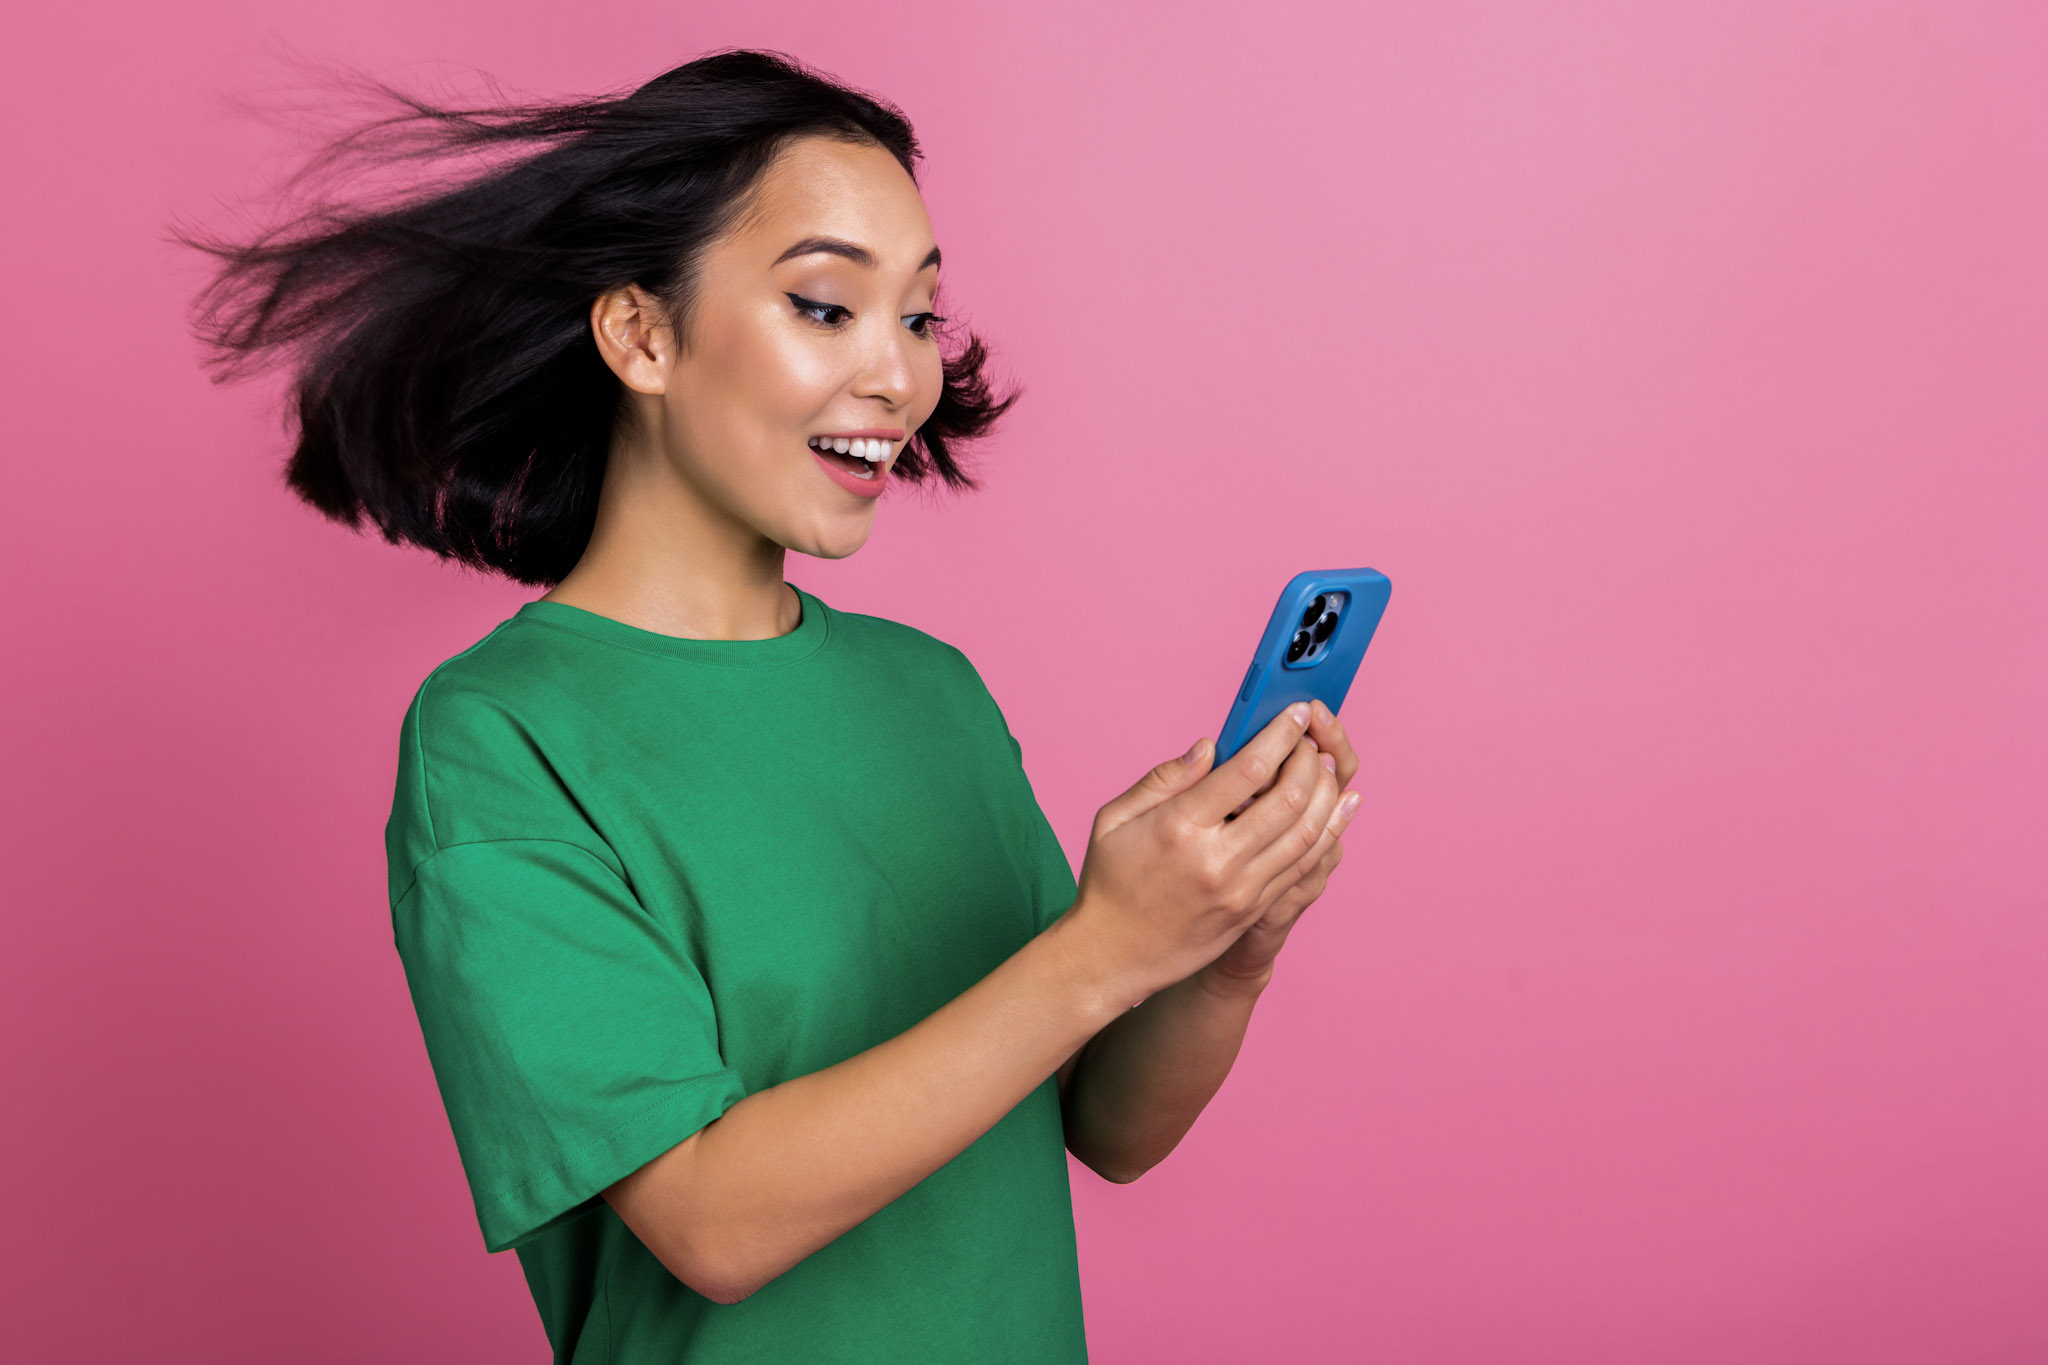 stock photo of an excited/impressed young woman holding a smartphone